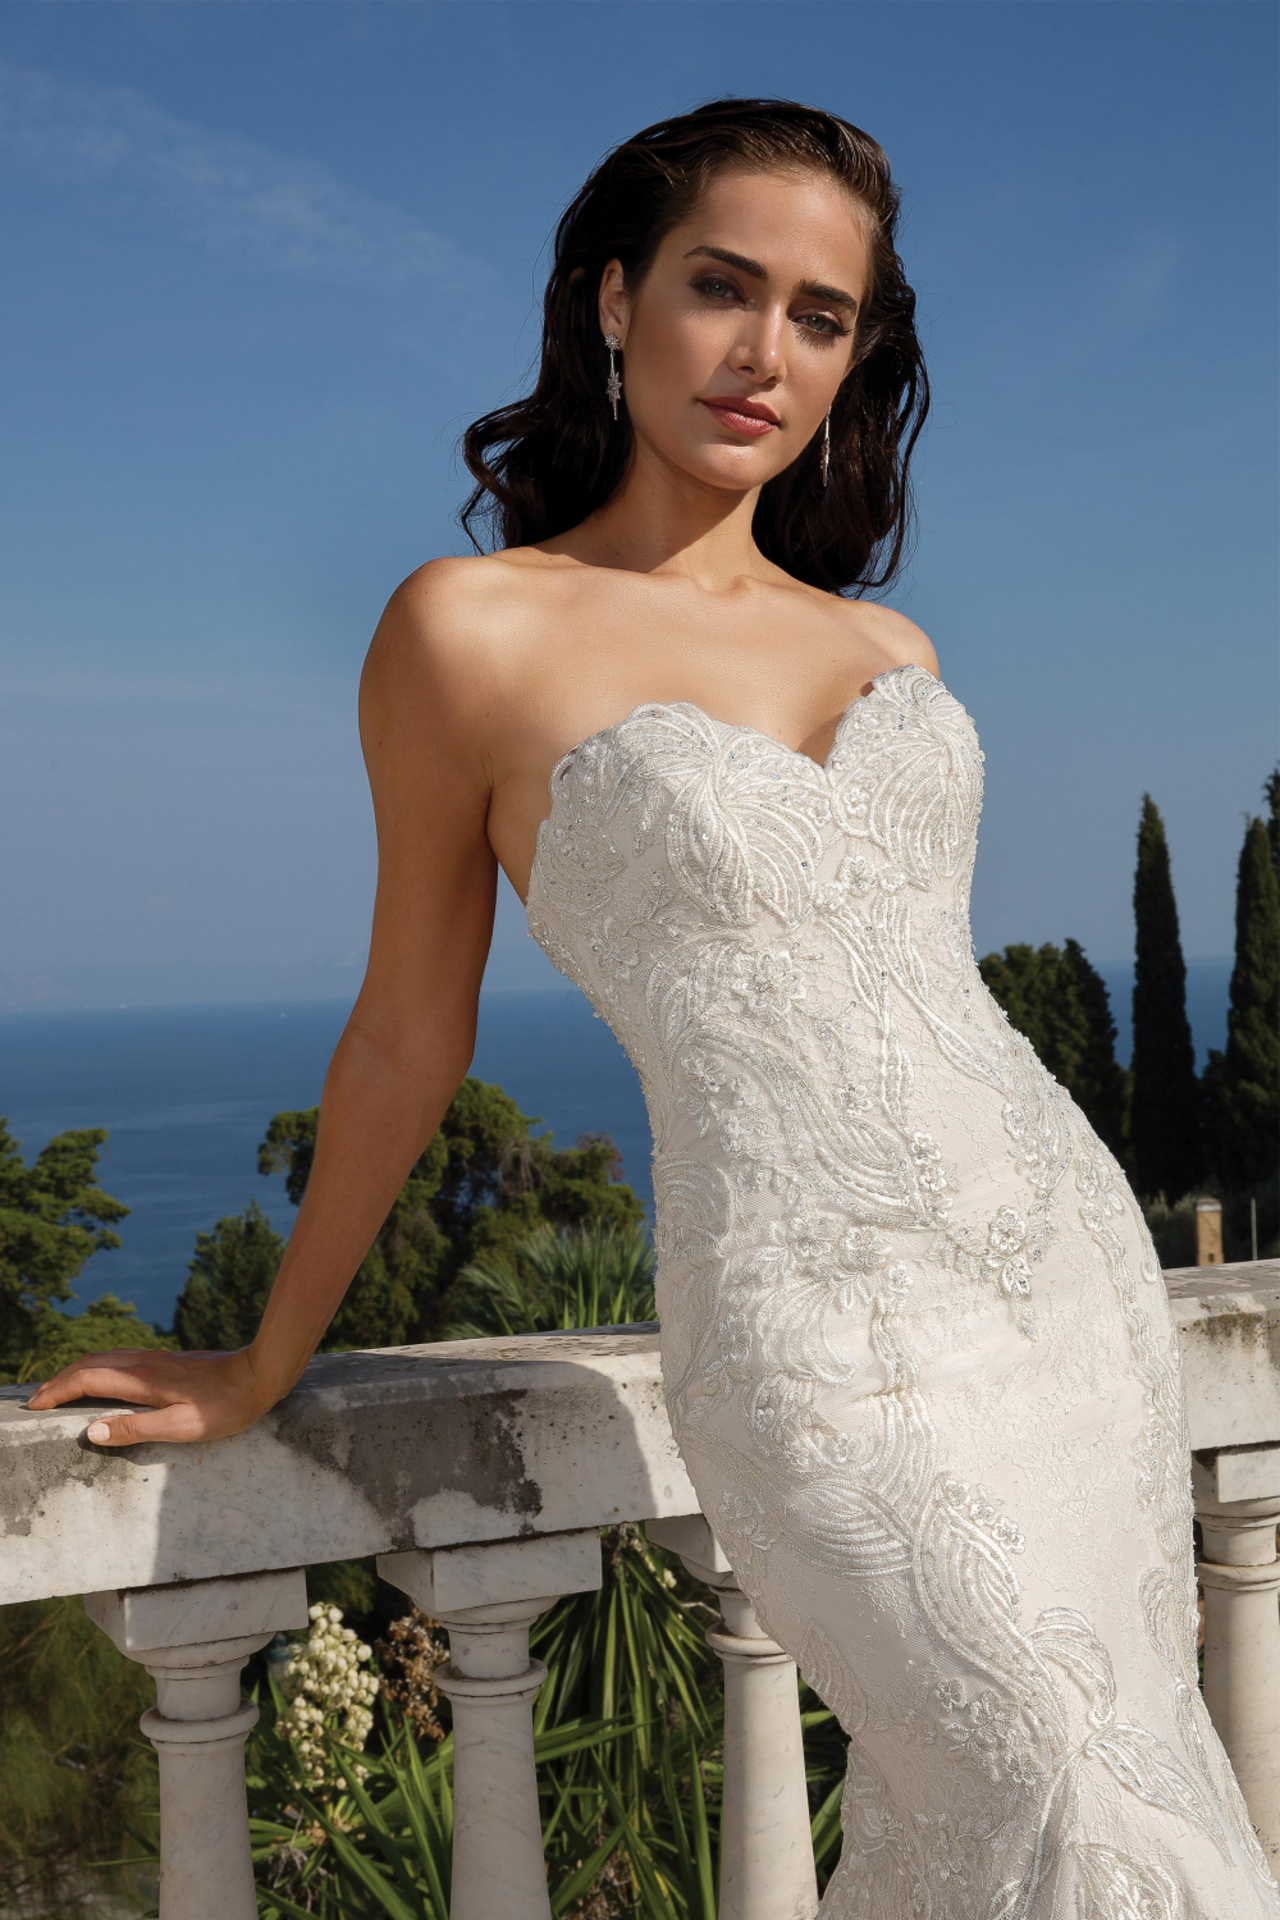 1 x Justin Alexander Beaded Chantilly Lace Fit and Flare Wedding Dress - UK Size 12 - RRP £1,500 - Image 3 of 4